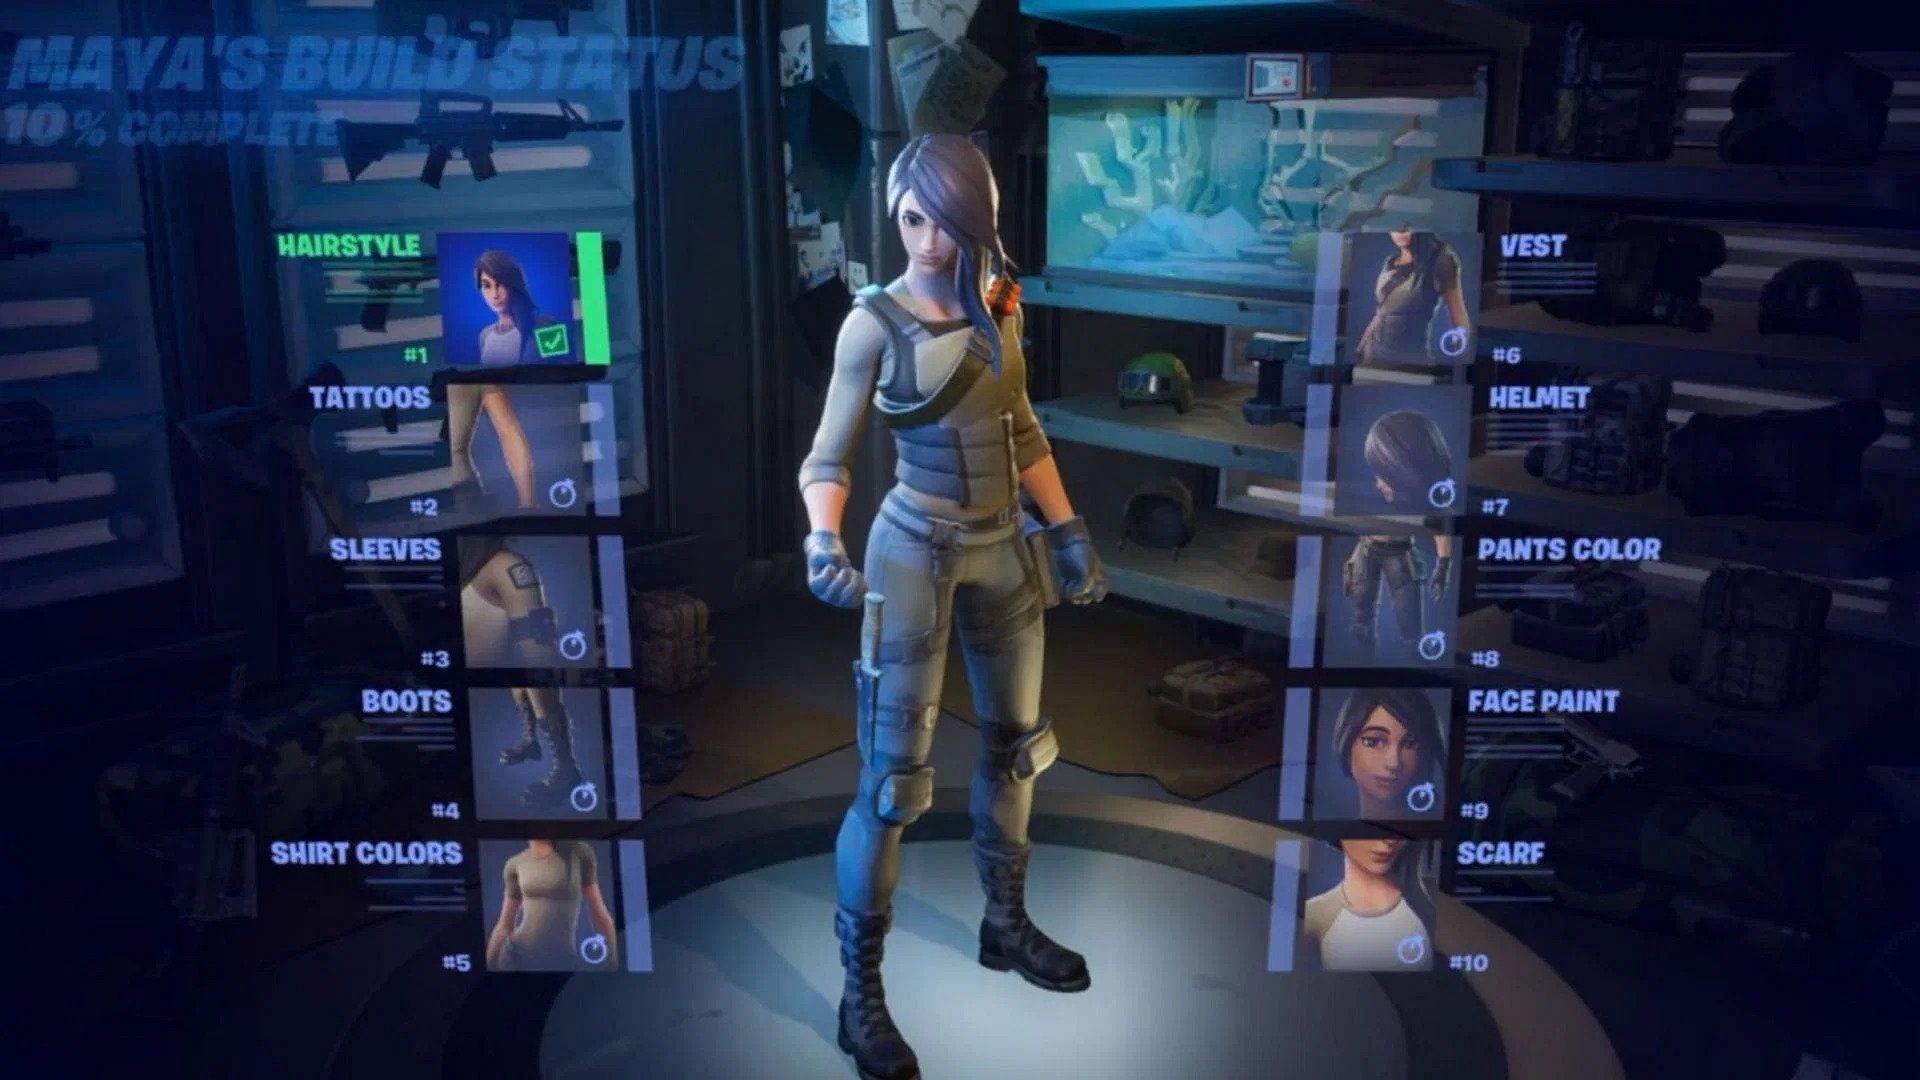 Forged outfits were introduced in Fortnite Chapter 2. (Image via Sportskeeda)